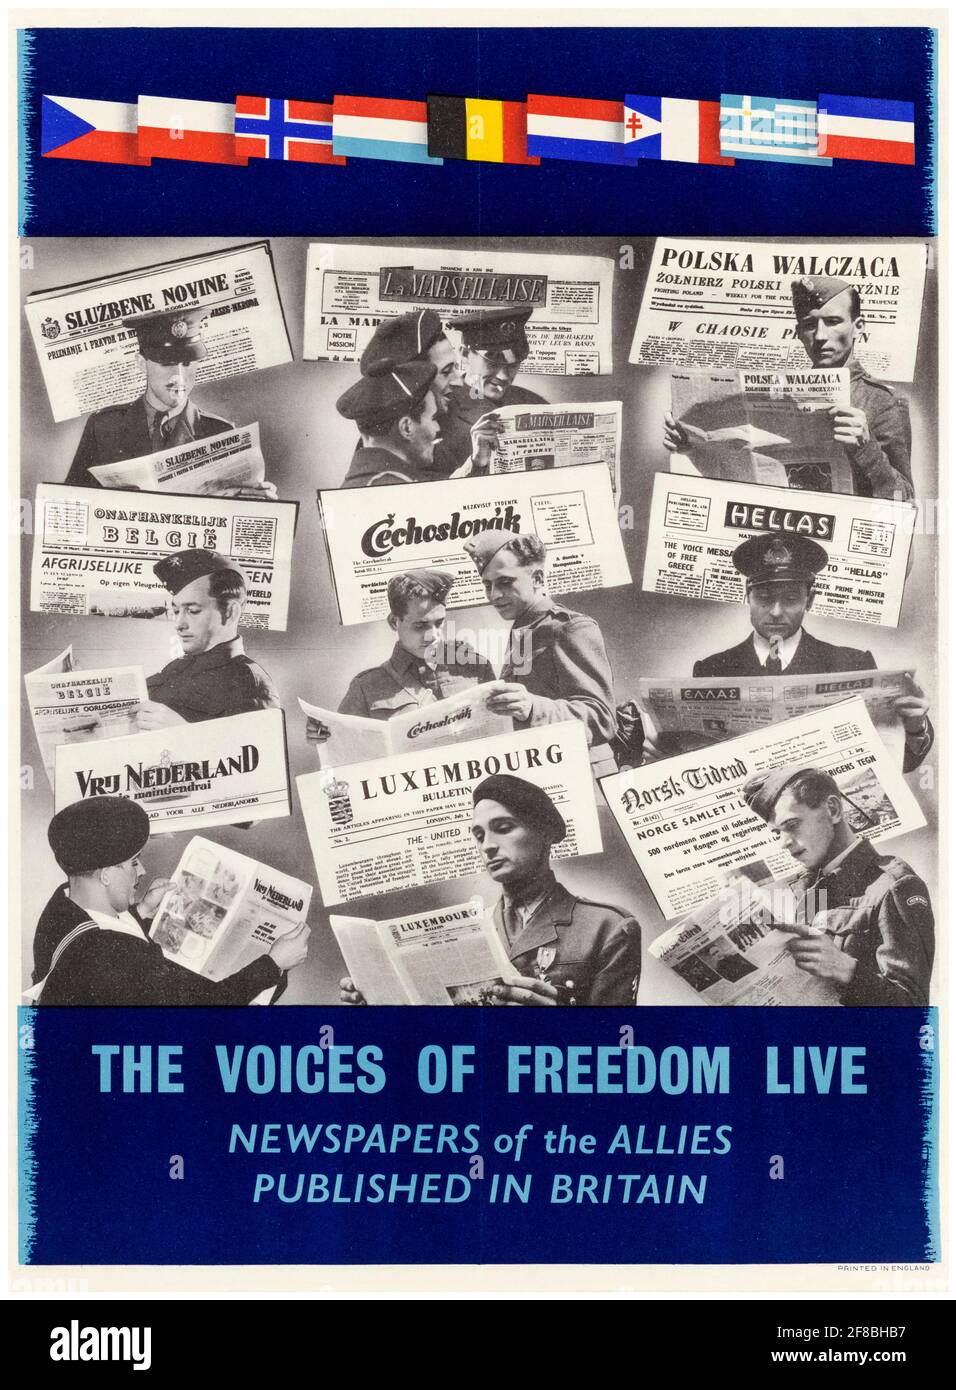 British, WW2, Voices of Freedom live: Newspapers of the Allies published in Britain, motivational poster, 1942-1945 Stock Photo